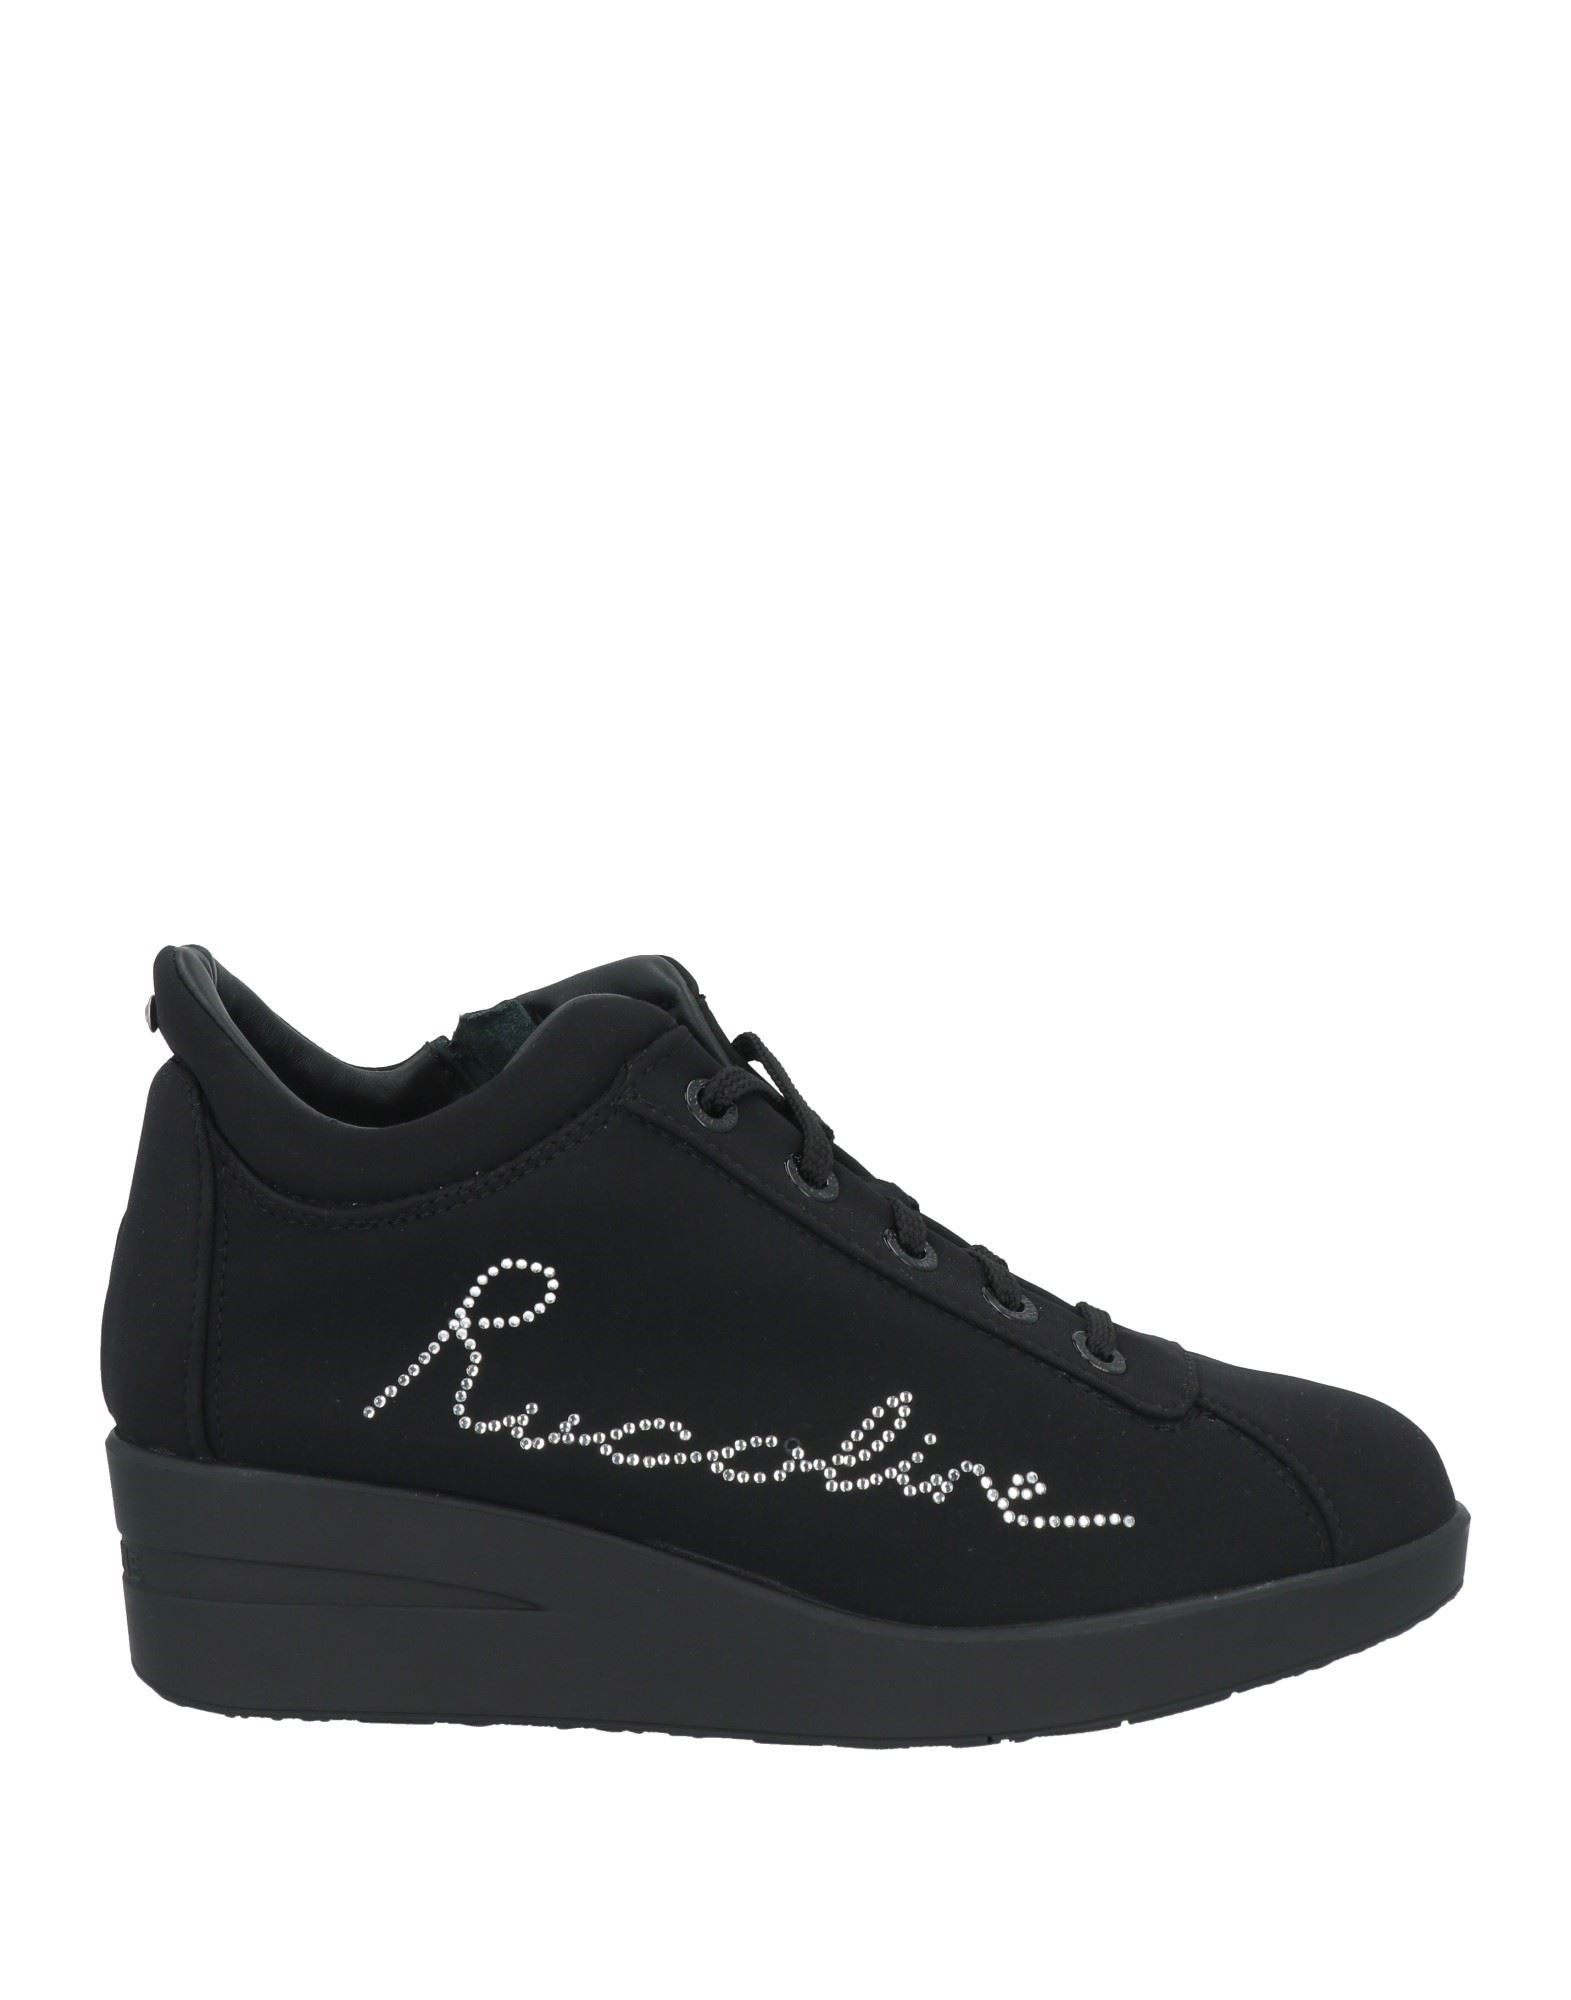 RUCO LINE RUCOLINE WOMAN SNEAKERS BLACK SIZE 8 TEXTILE FIBERS,11496940AN 5